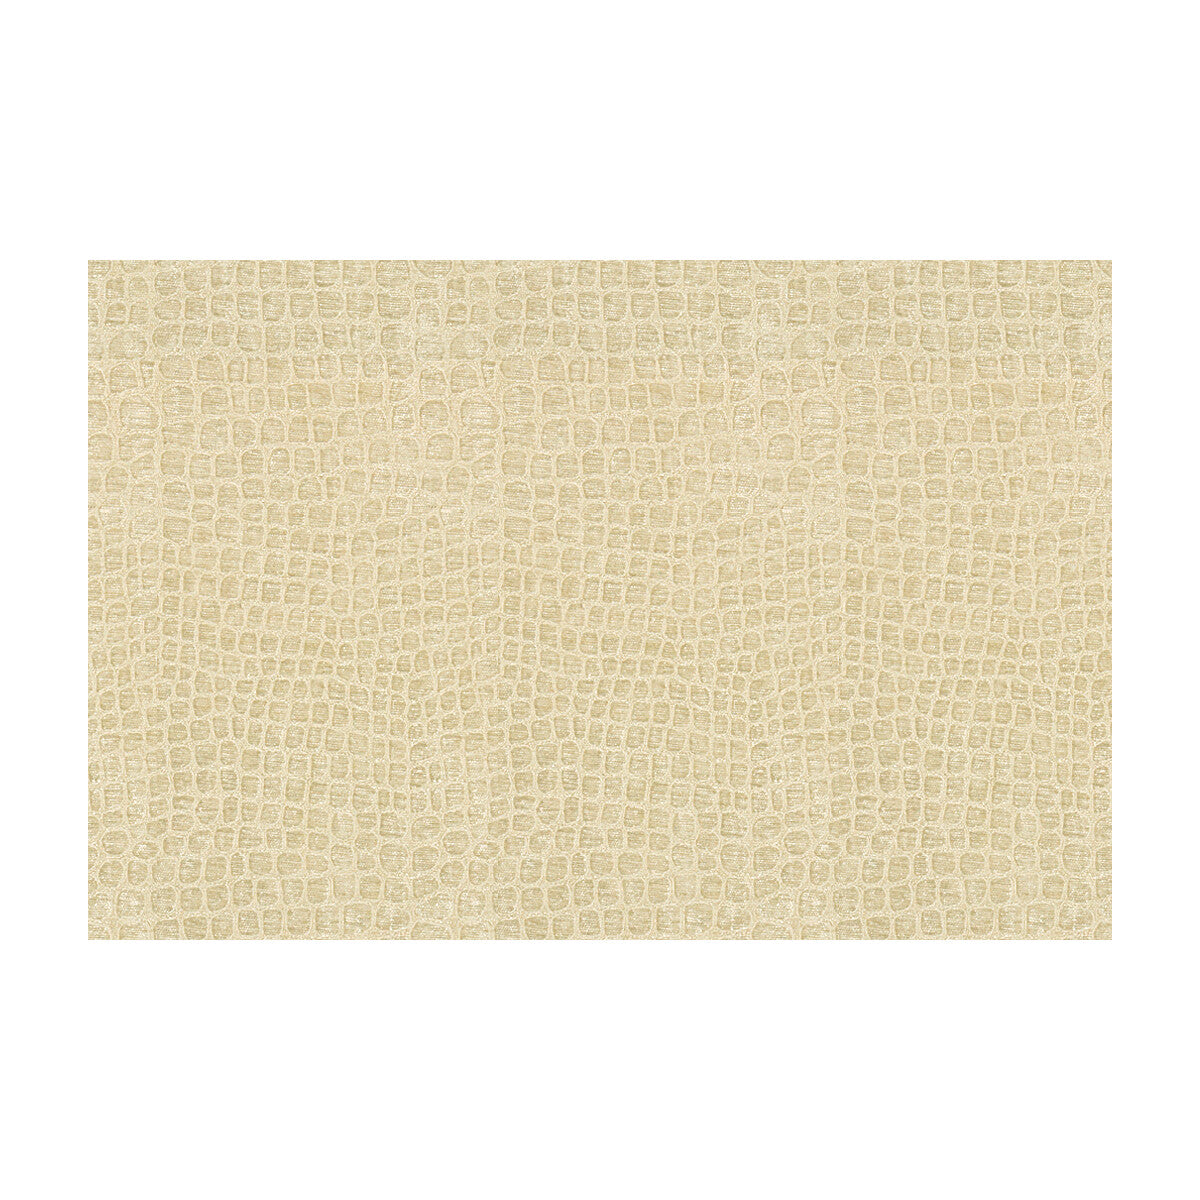 Finnian fabric in coconut color - pattern 33107.106.0 - by Kravet Contract